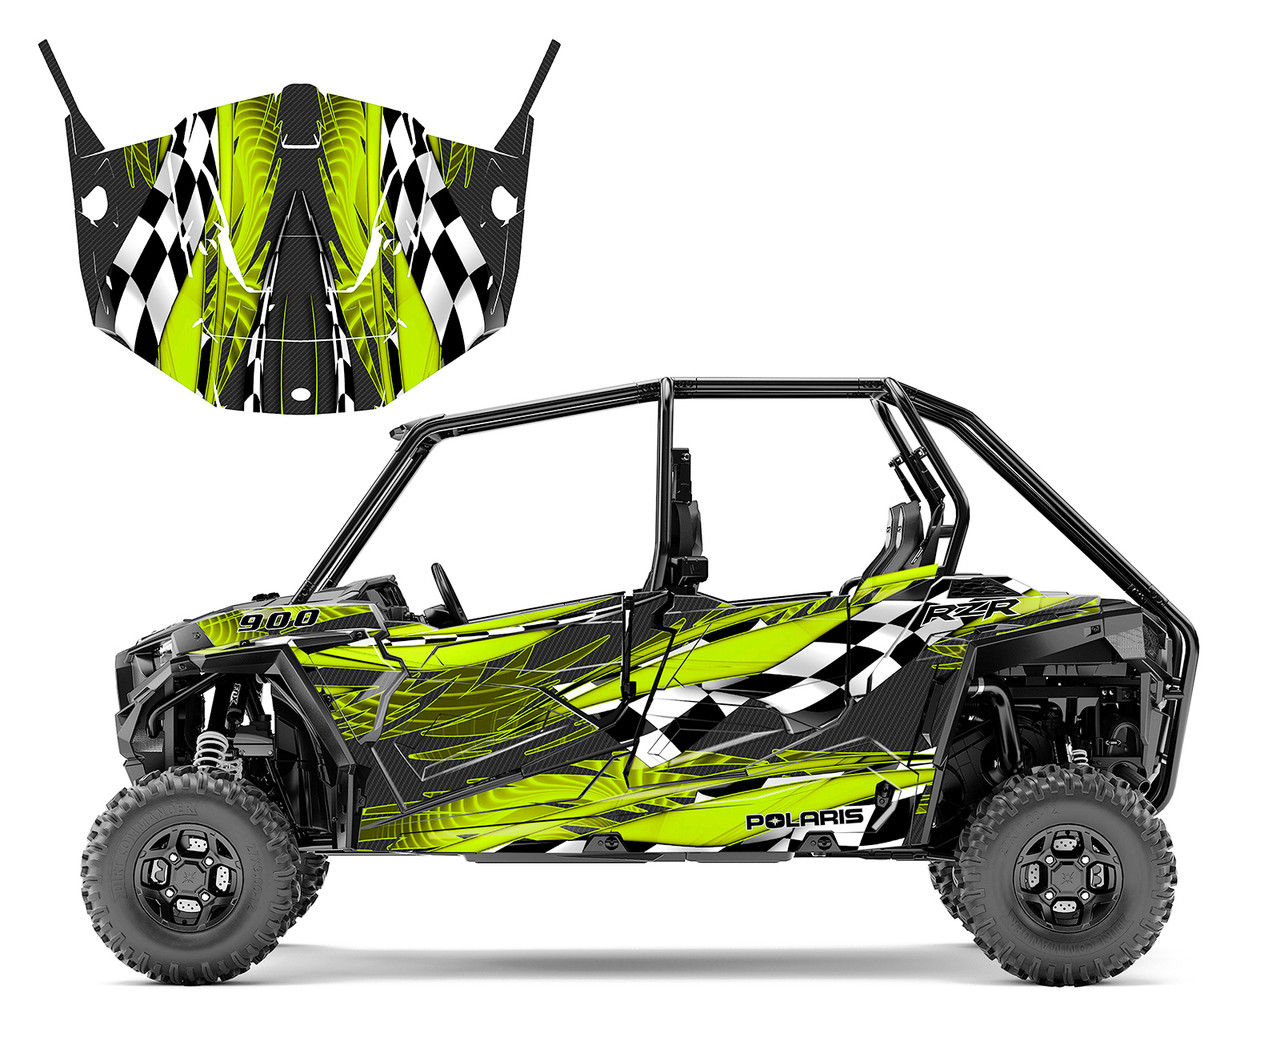 2018 RZR XP4, S4 graphics decal kit design 3500 neon green